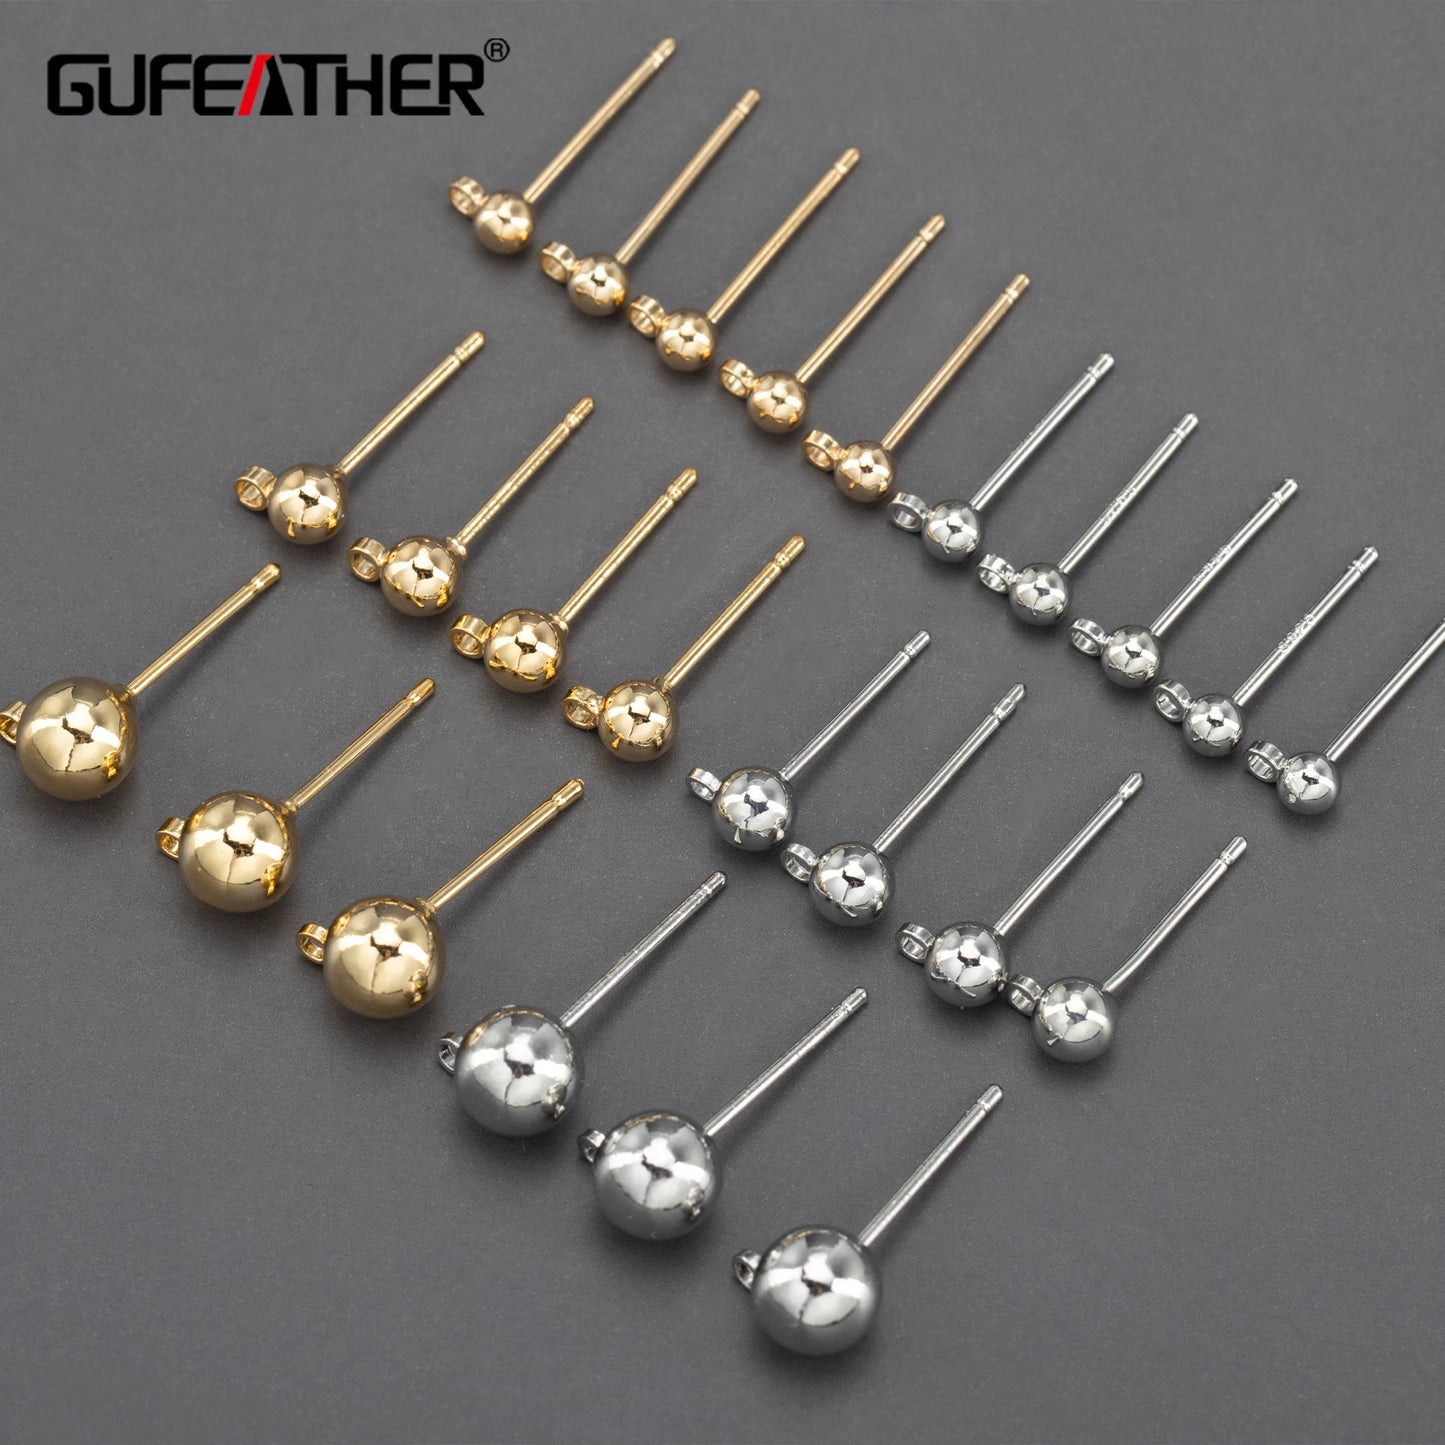 GUFEATHER M575,jewelry accessories,18k gold plated,copper,pass REACH,nickel free,stud earring,jewelry making findings,100pcs/lot